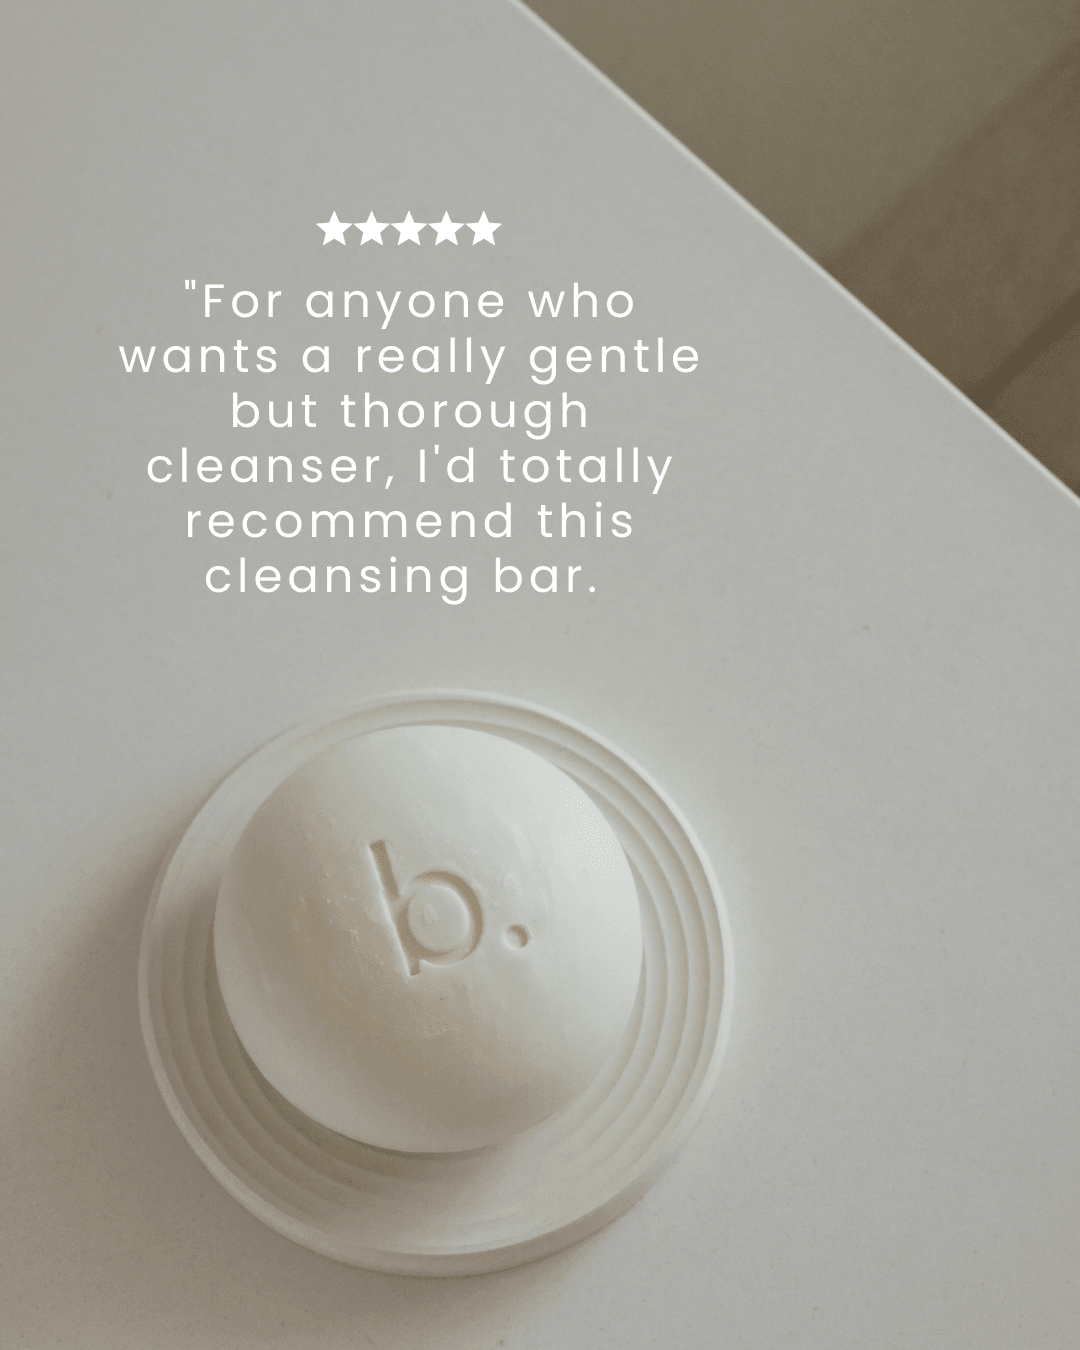 5 Star Customer Review of the Cleanse Bar